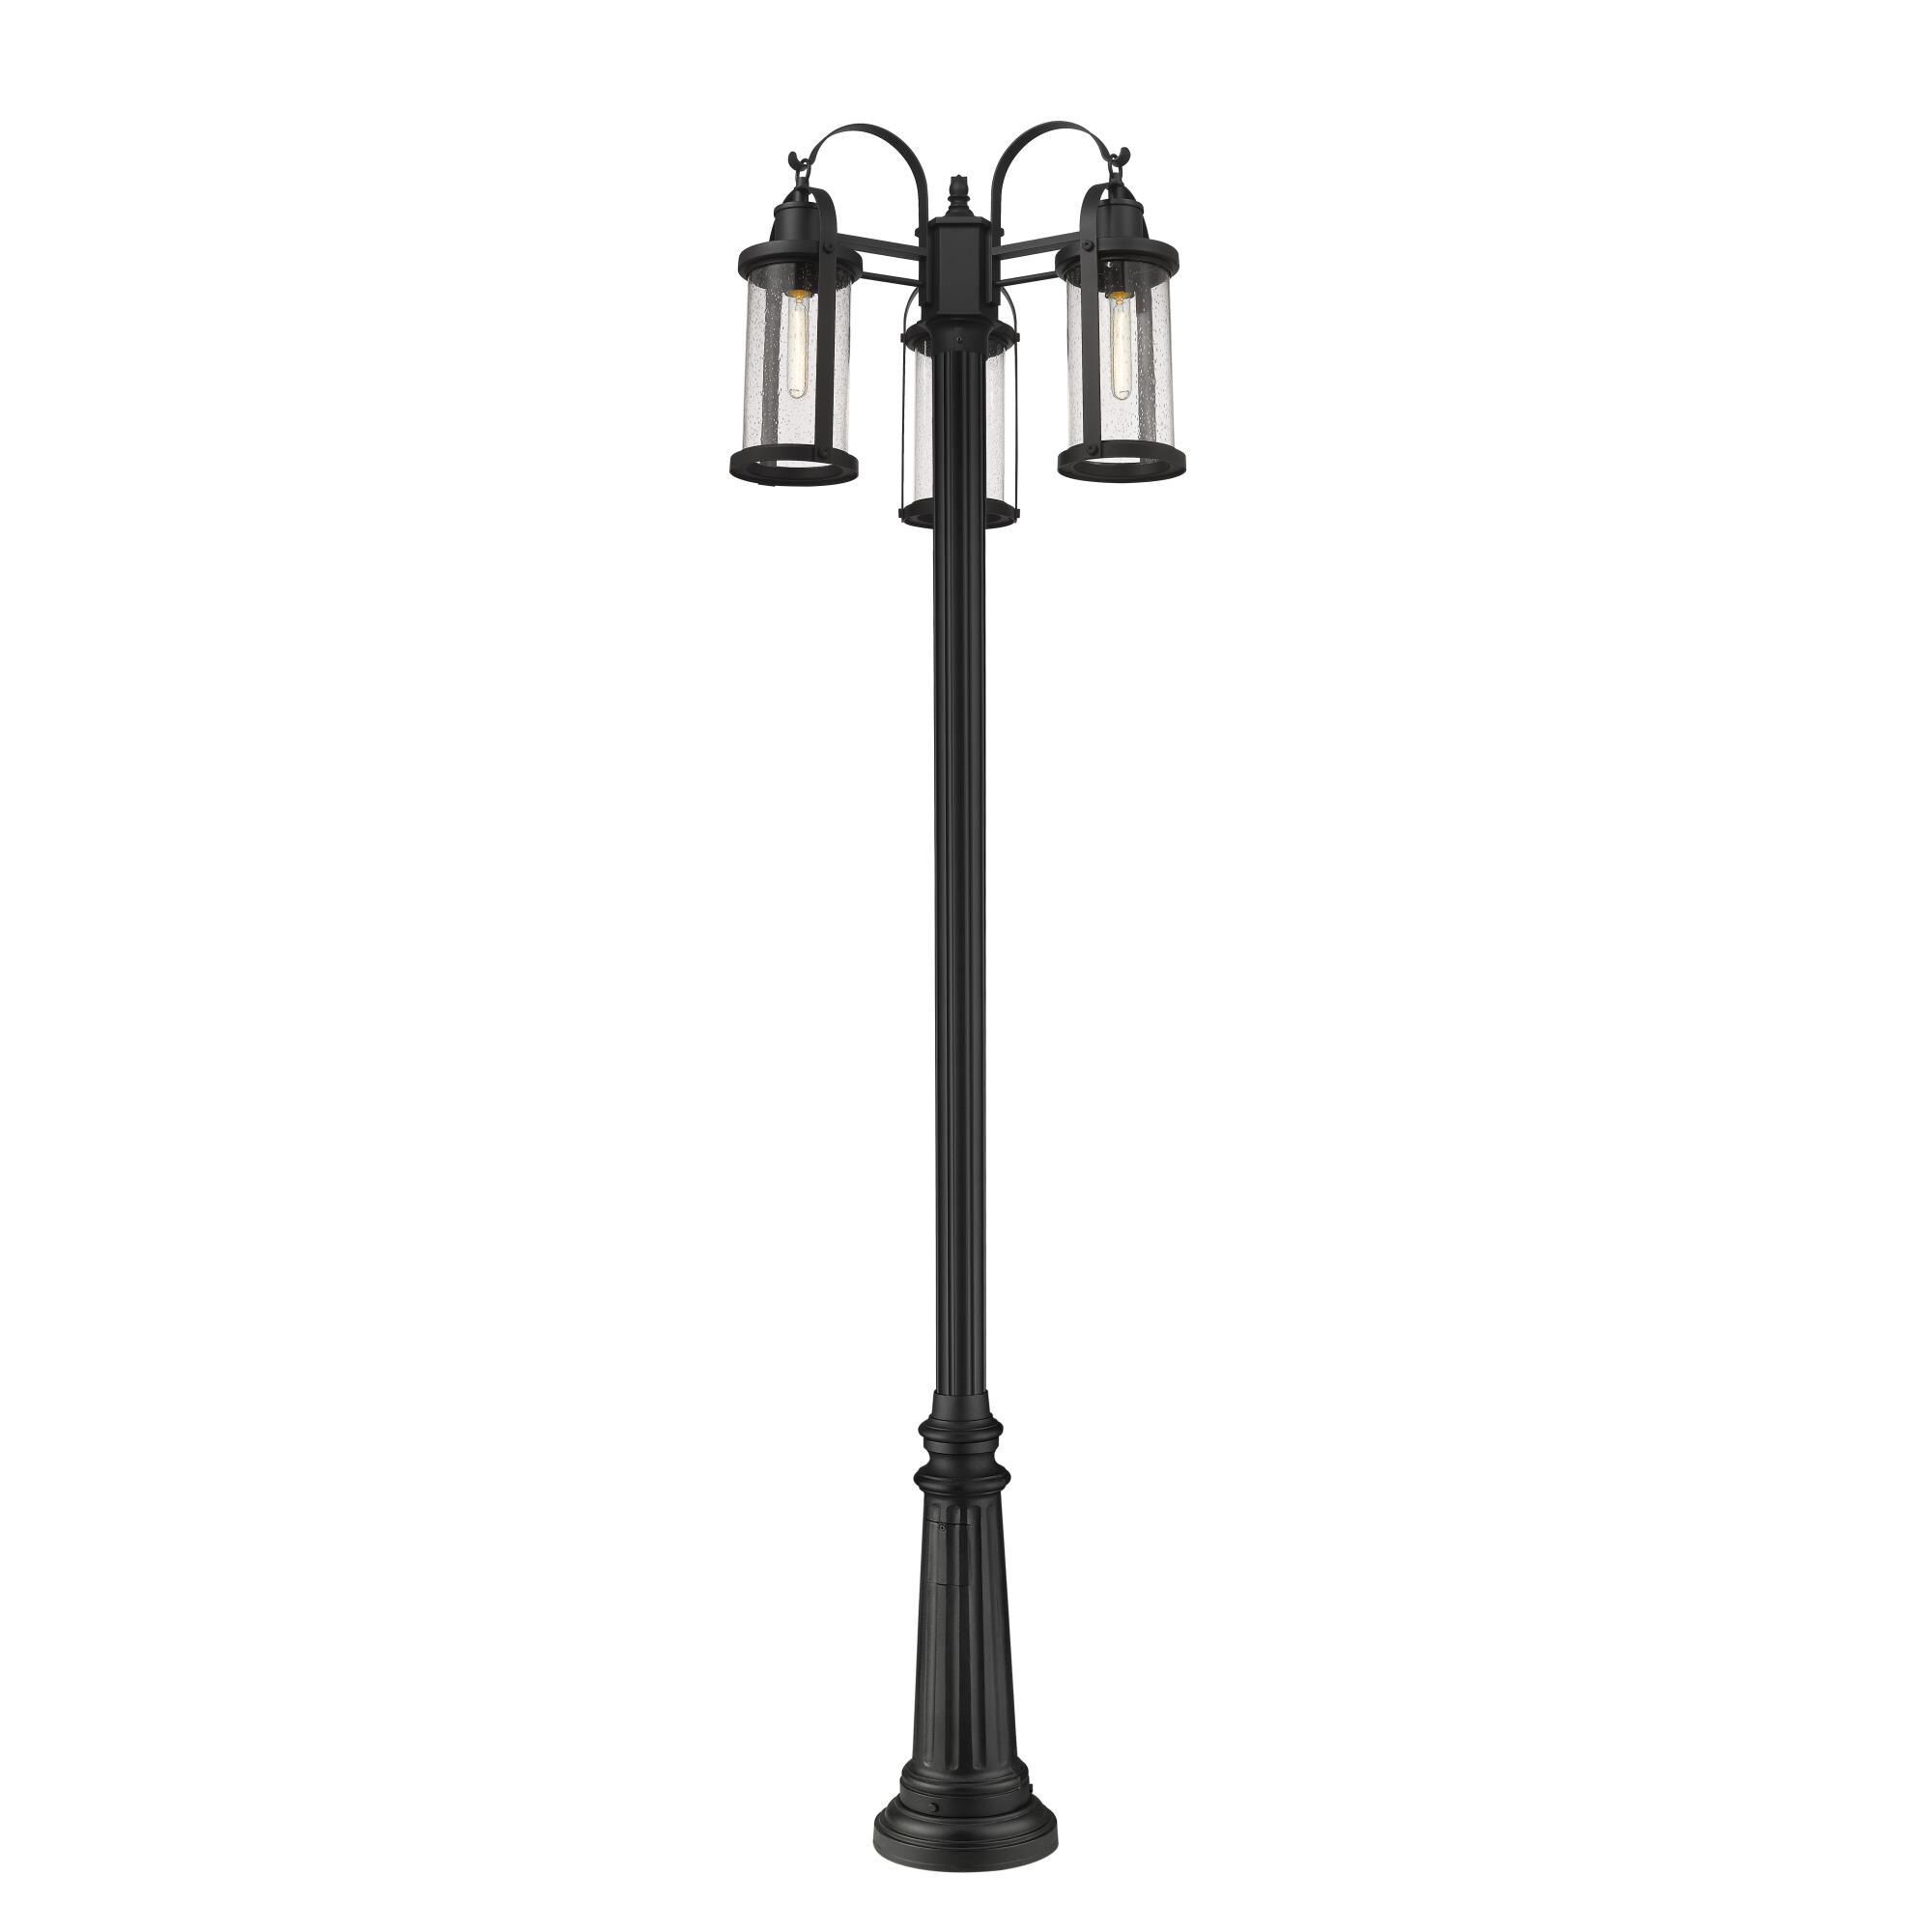 Photos - Floodlight / Street Light Z-Lite Roundhouse 115 Inch Tall 3 Light Outdoor Post Lamp Roundhouse - 569